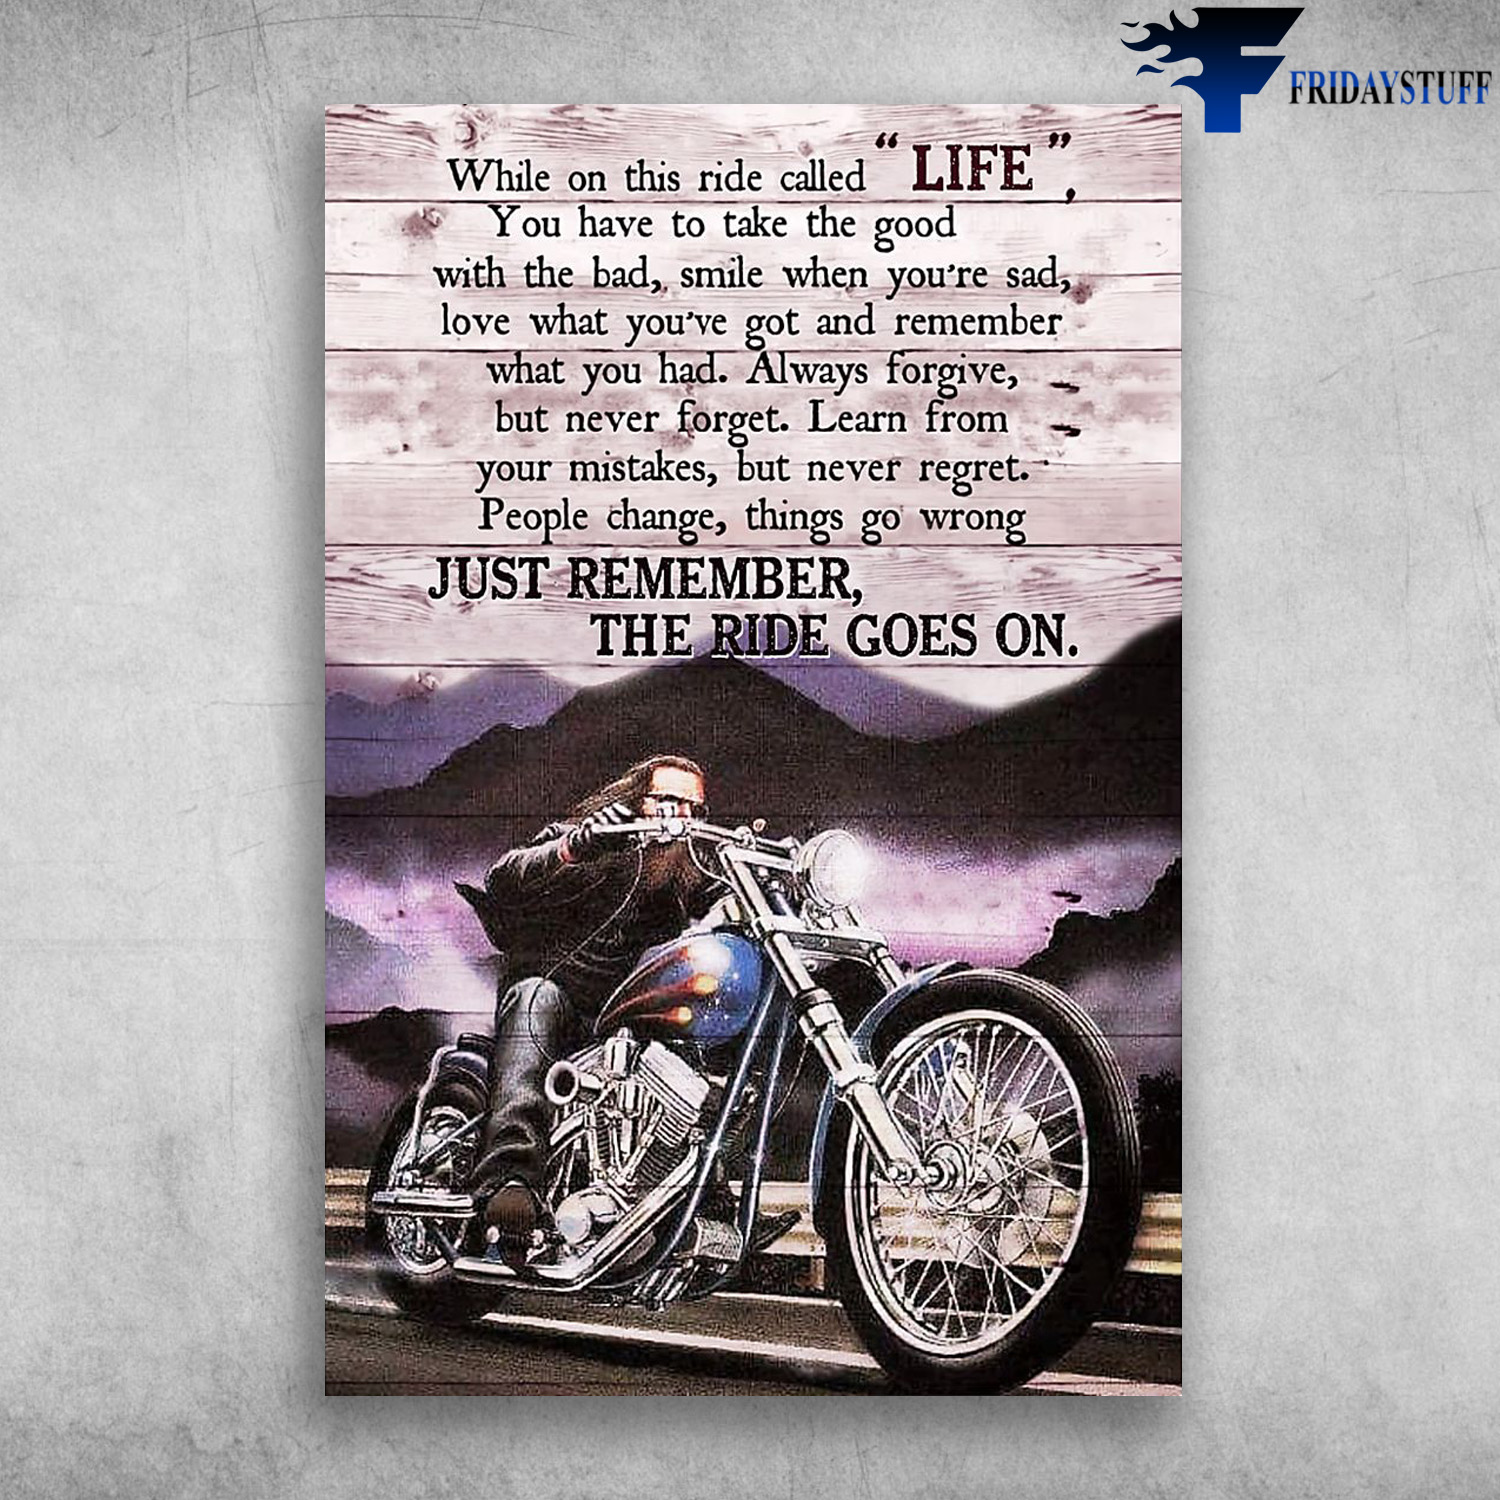 Motorcycle Man - While On This Ride Called Life, You Have To Take The Good With The Bad